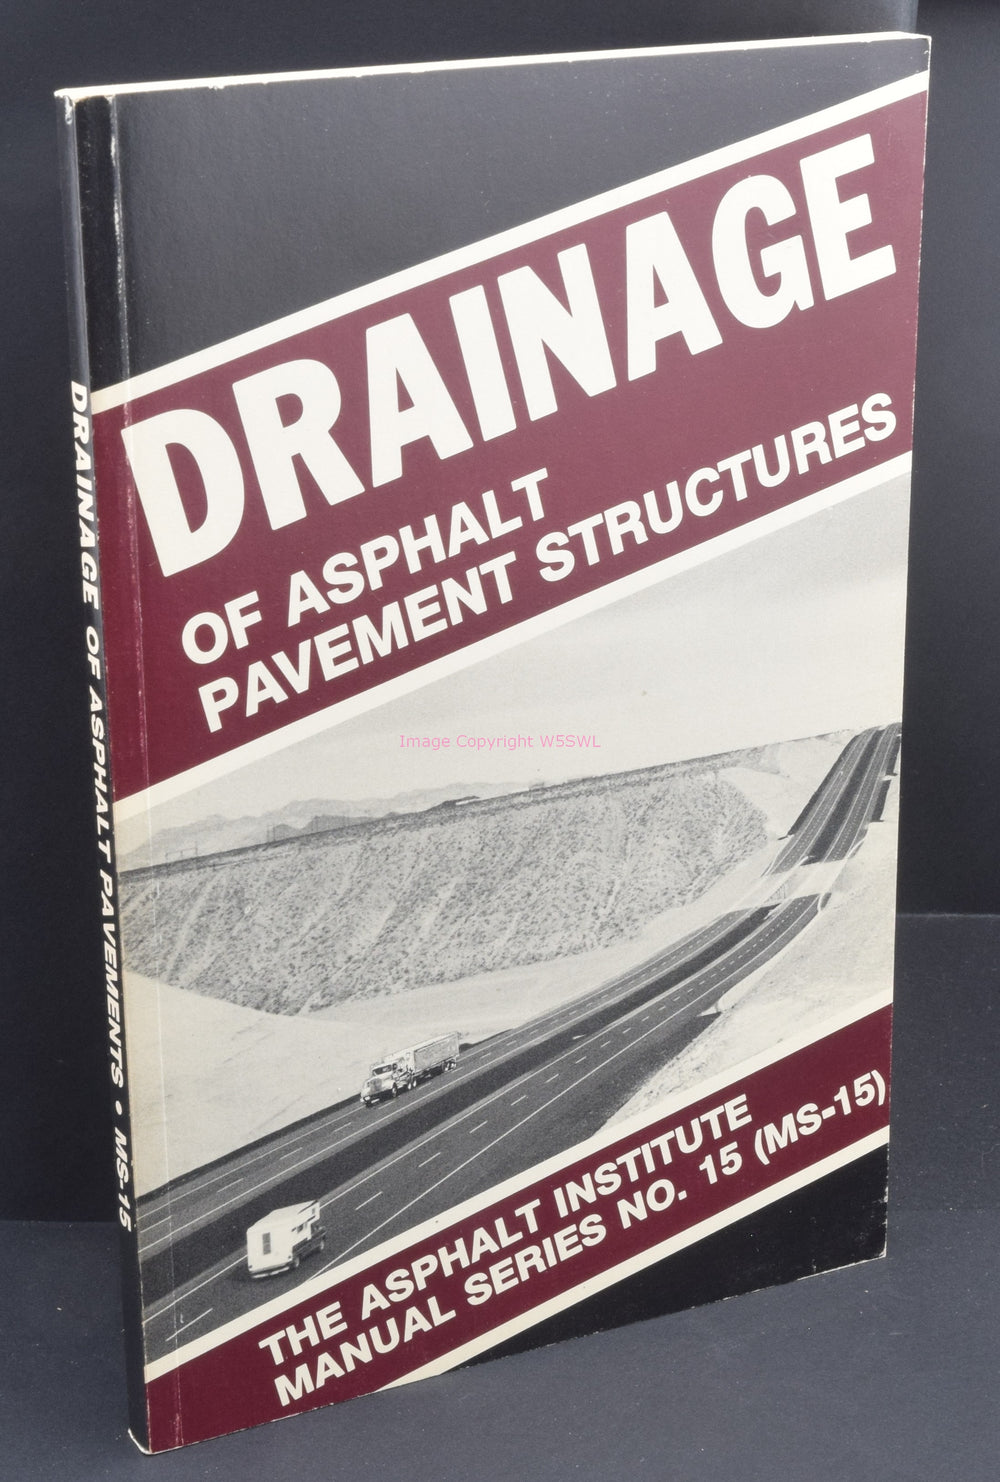 Drainage Of Asphalt Pavement Structures - Asphalt Institute Manual Series #15 - Dave's Hobby Shop by W5SWL